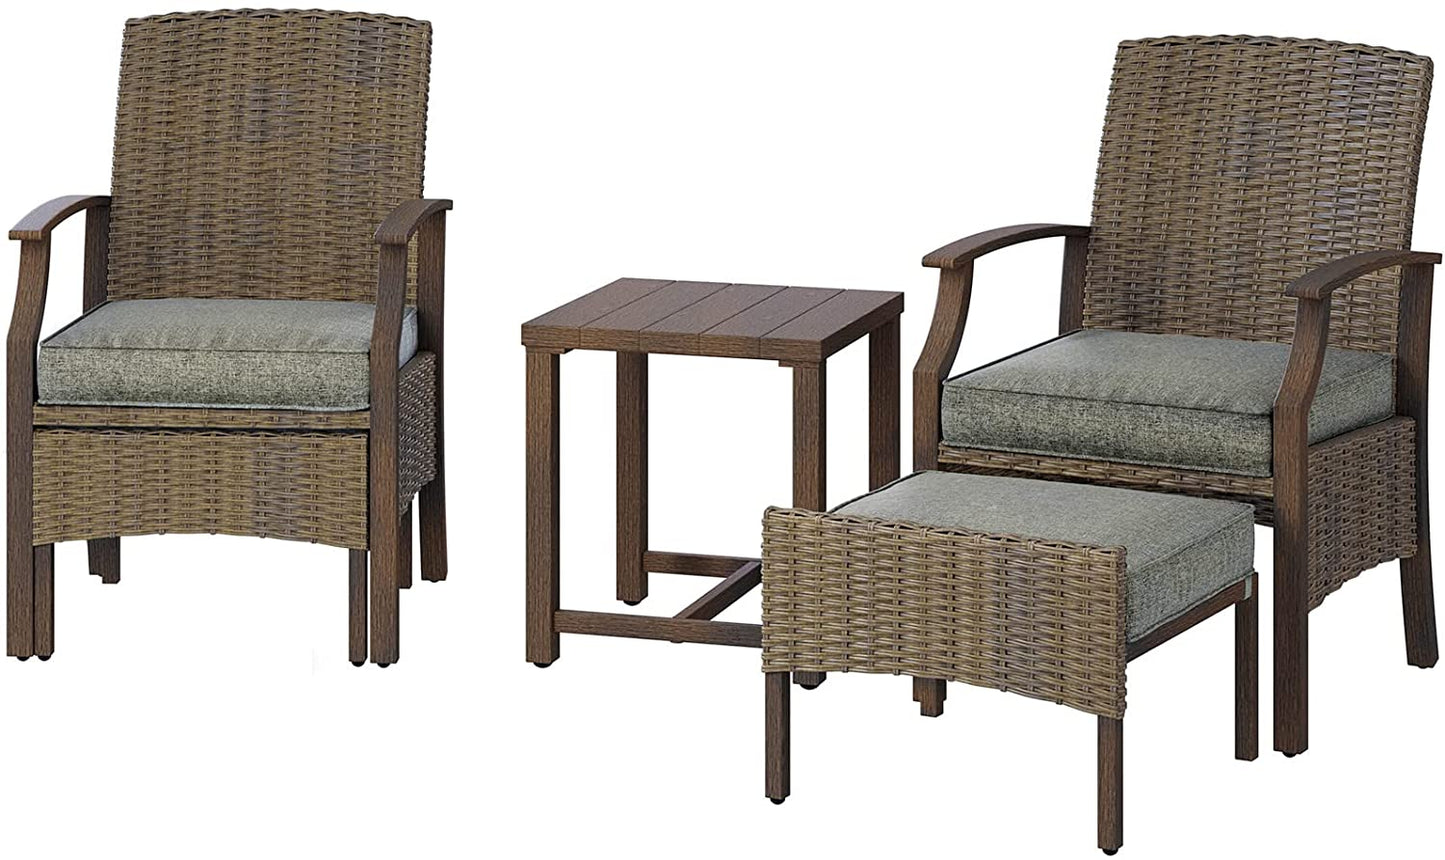 Outdoor Patio Chairs Set of 2 with Ottoman and Coffee Table